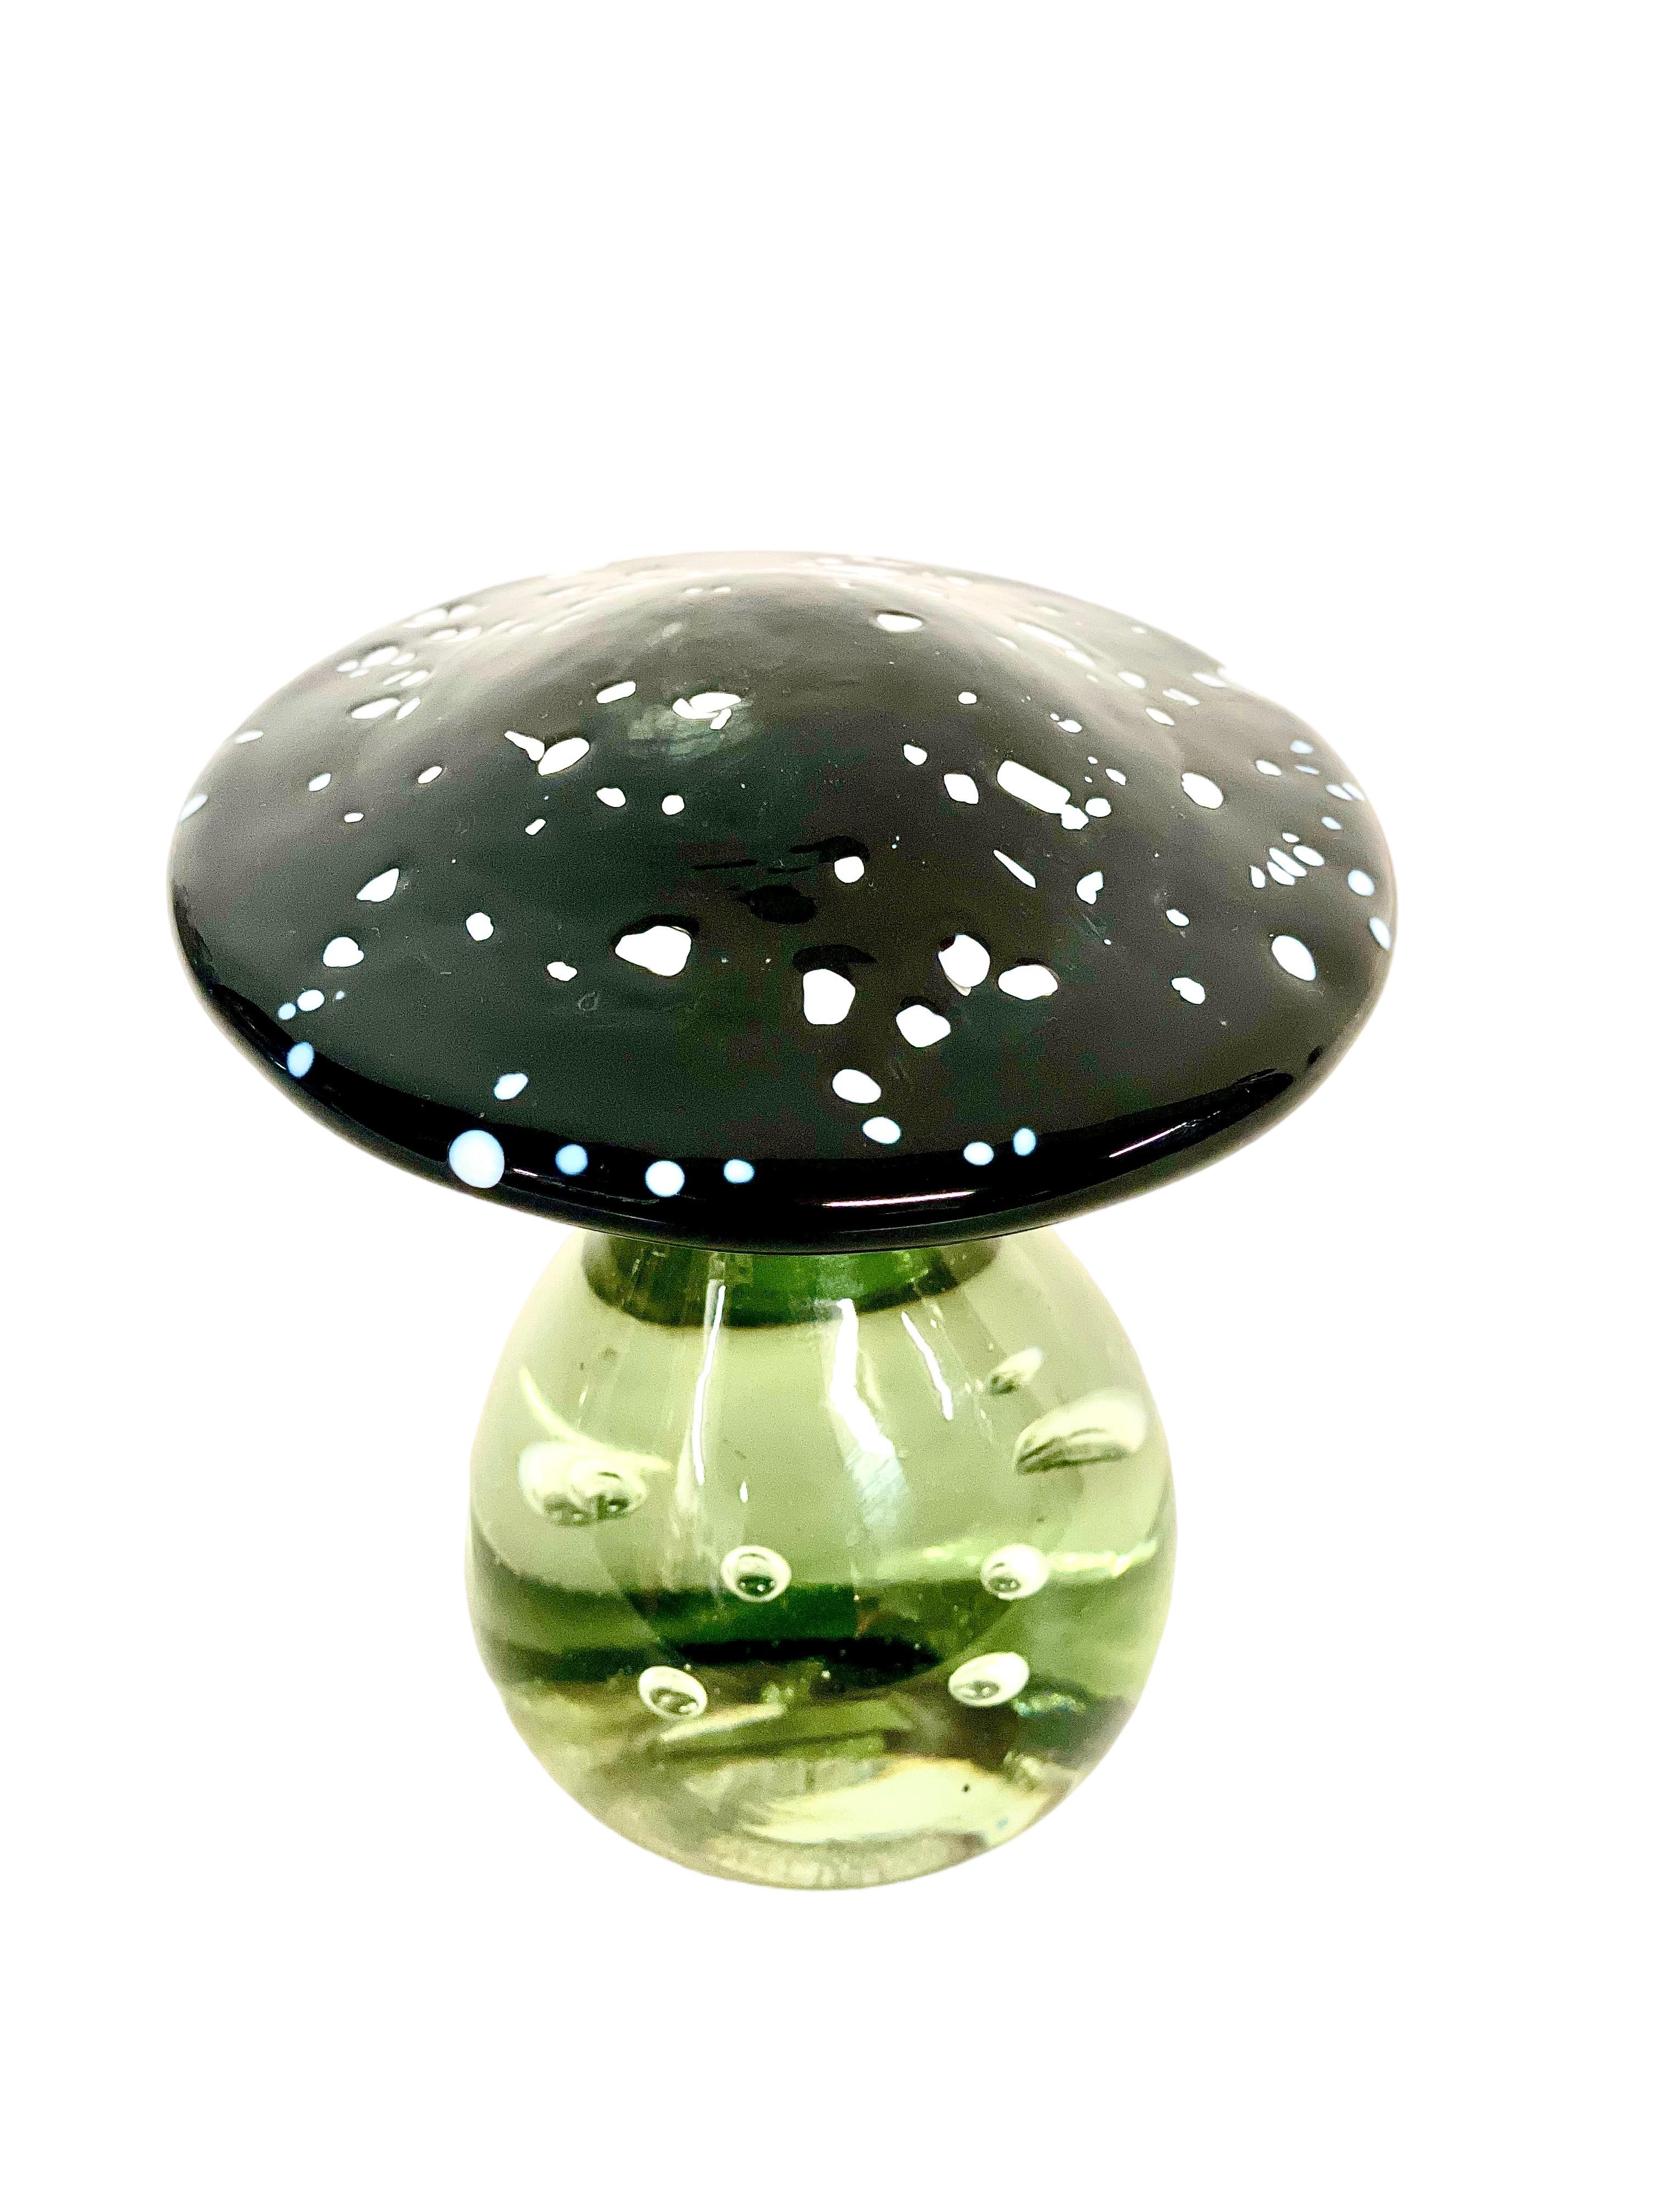 An unusual and very charming vintage blown glass ornamental mushroom, its transparent stem flecked with tiny air bubbles and topped with a shapely black and white speckled cap. Beautifully hand-crafted from Murano glass, this adorable little